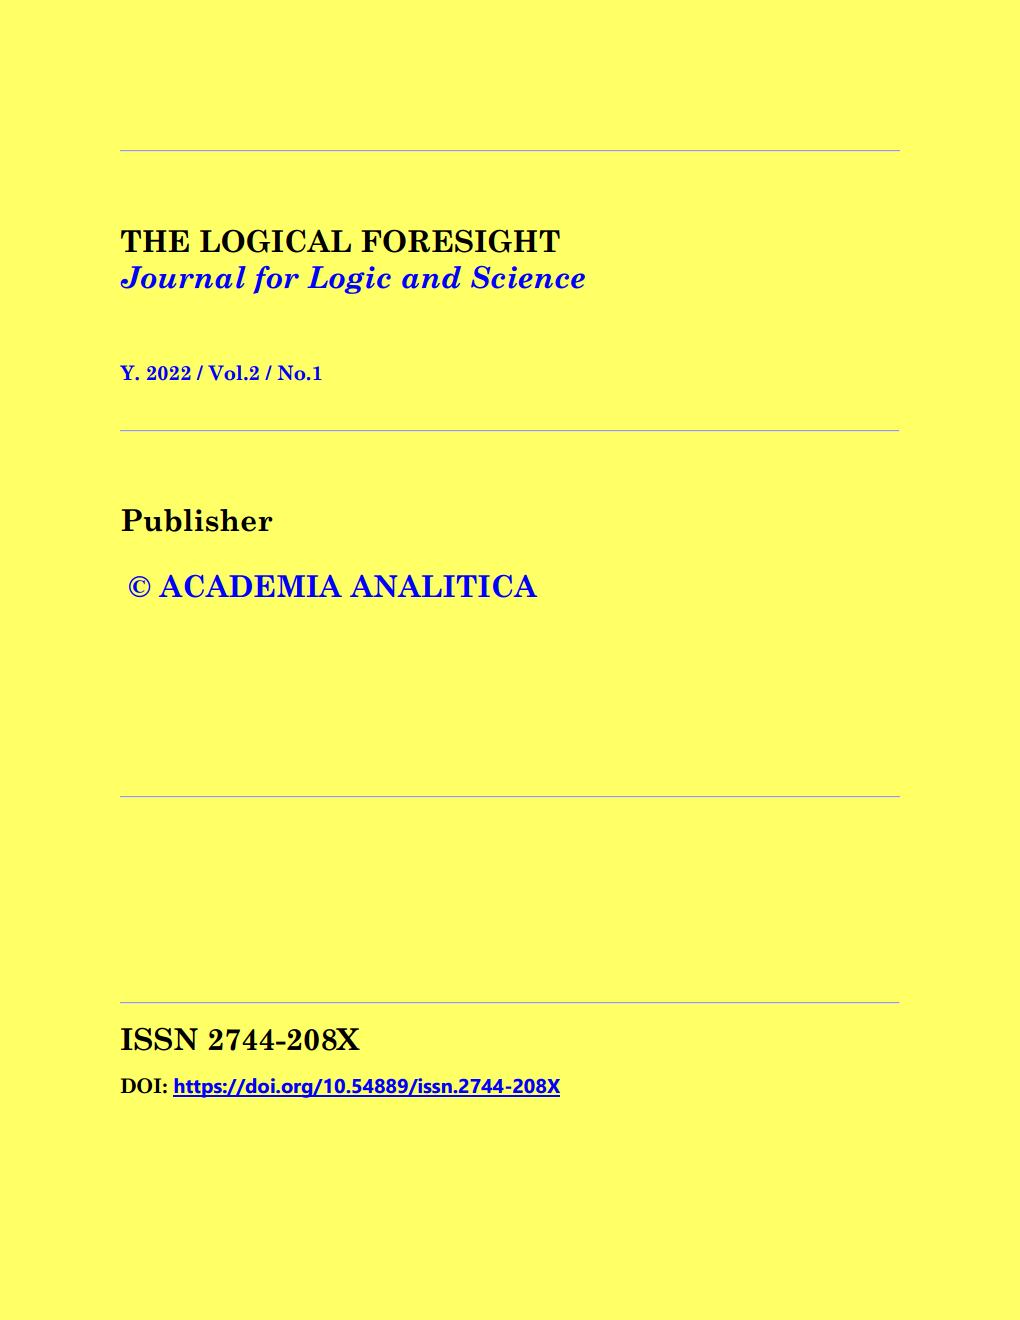 					View Vol. 2 No. 1 (2022): The Logical Foresight
				